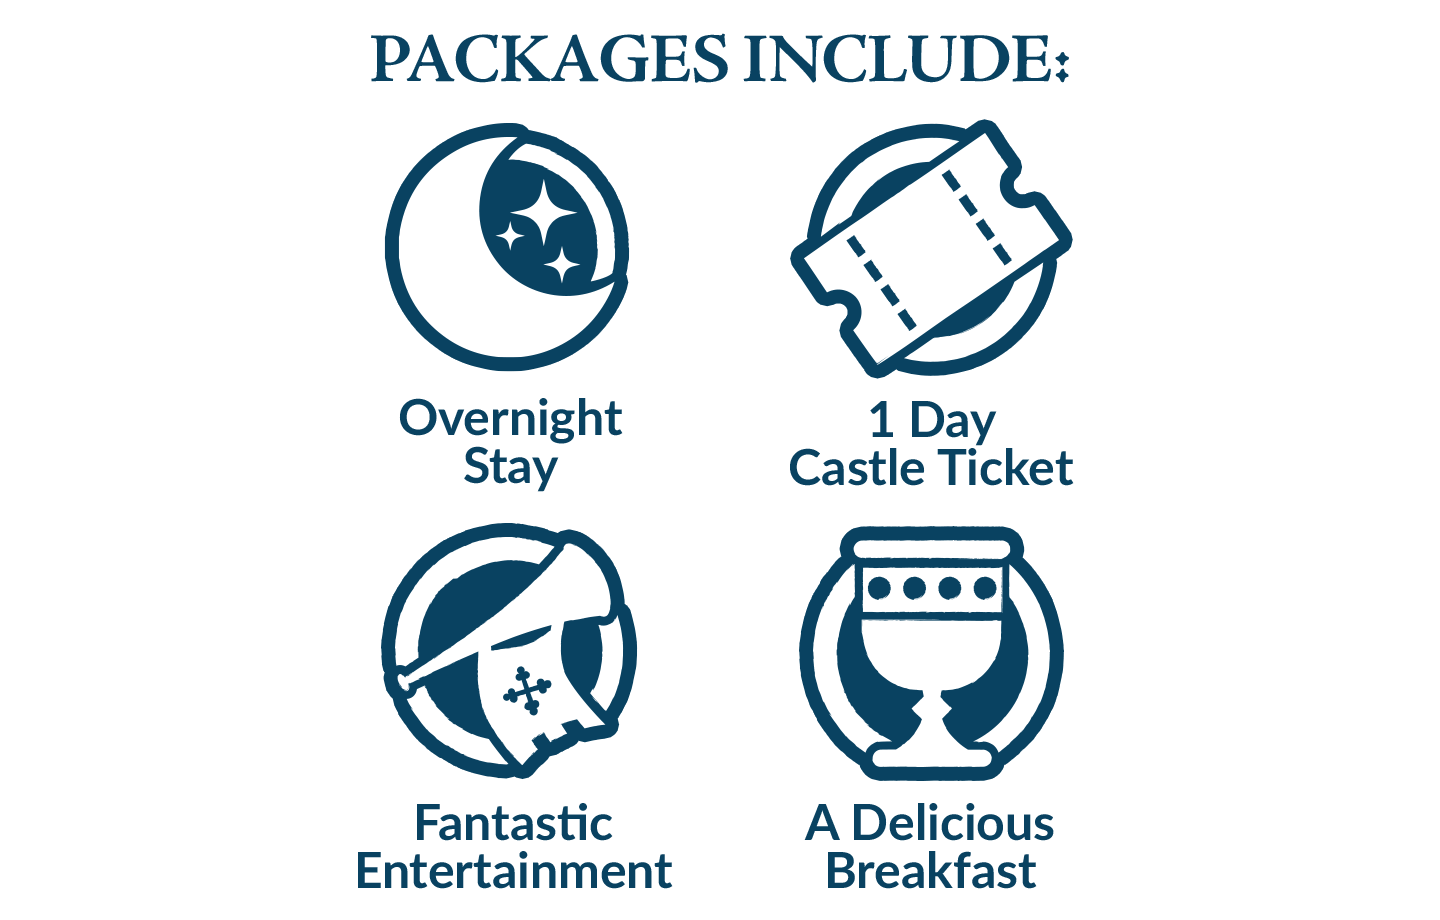 Nearby hotel stays with Warwick Castle Breaks include an overnight stay, a delicious breakfast and 1-day Castle entry tickets with access to live shows and attractions.